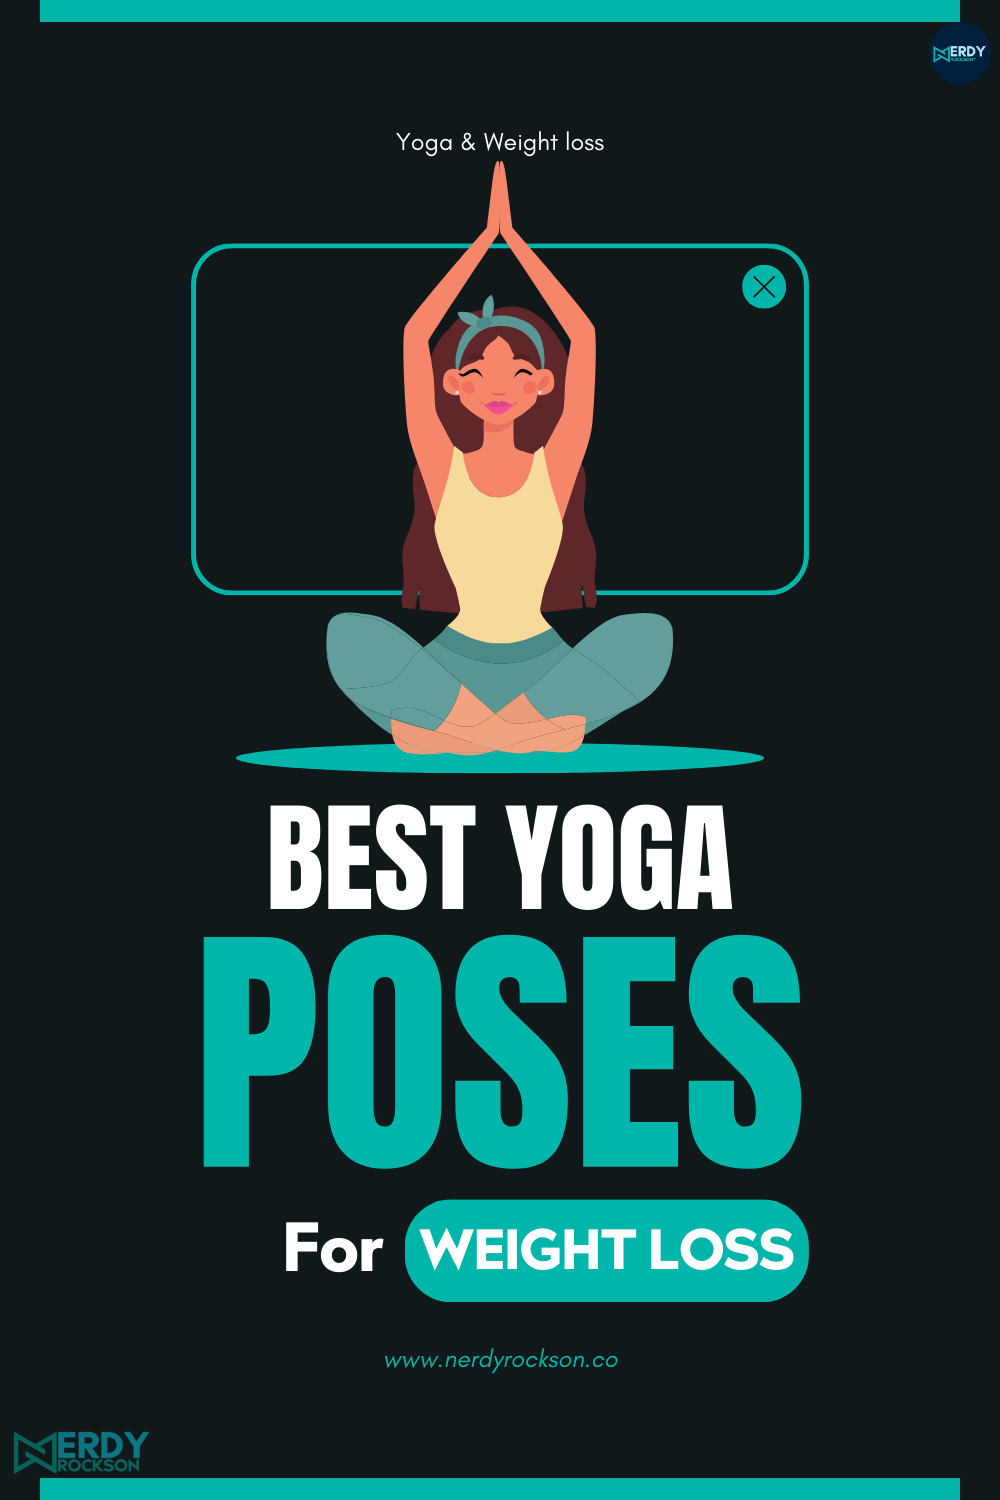 6 Best Yoga Poses For Weight Loss